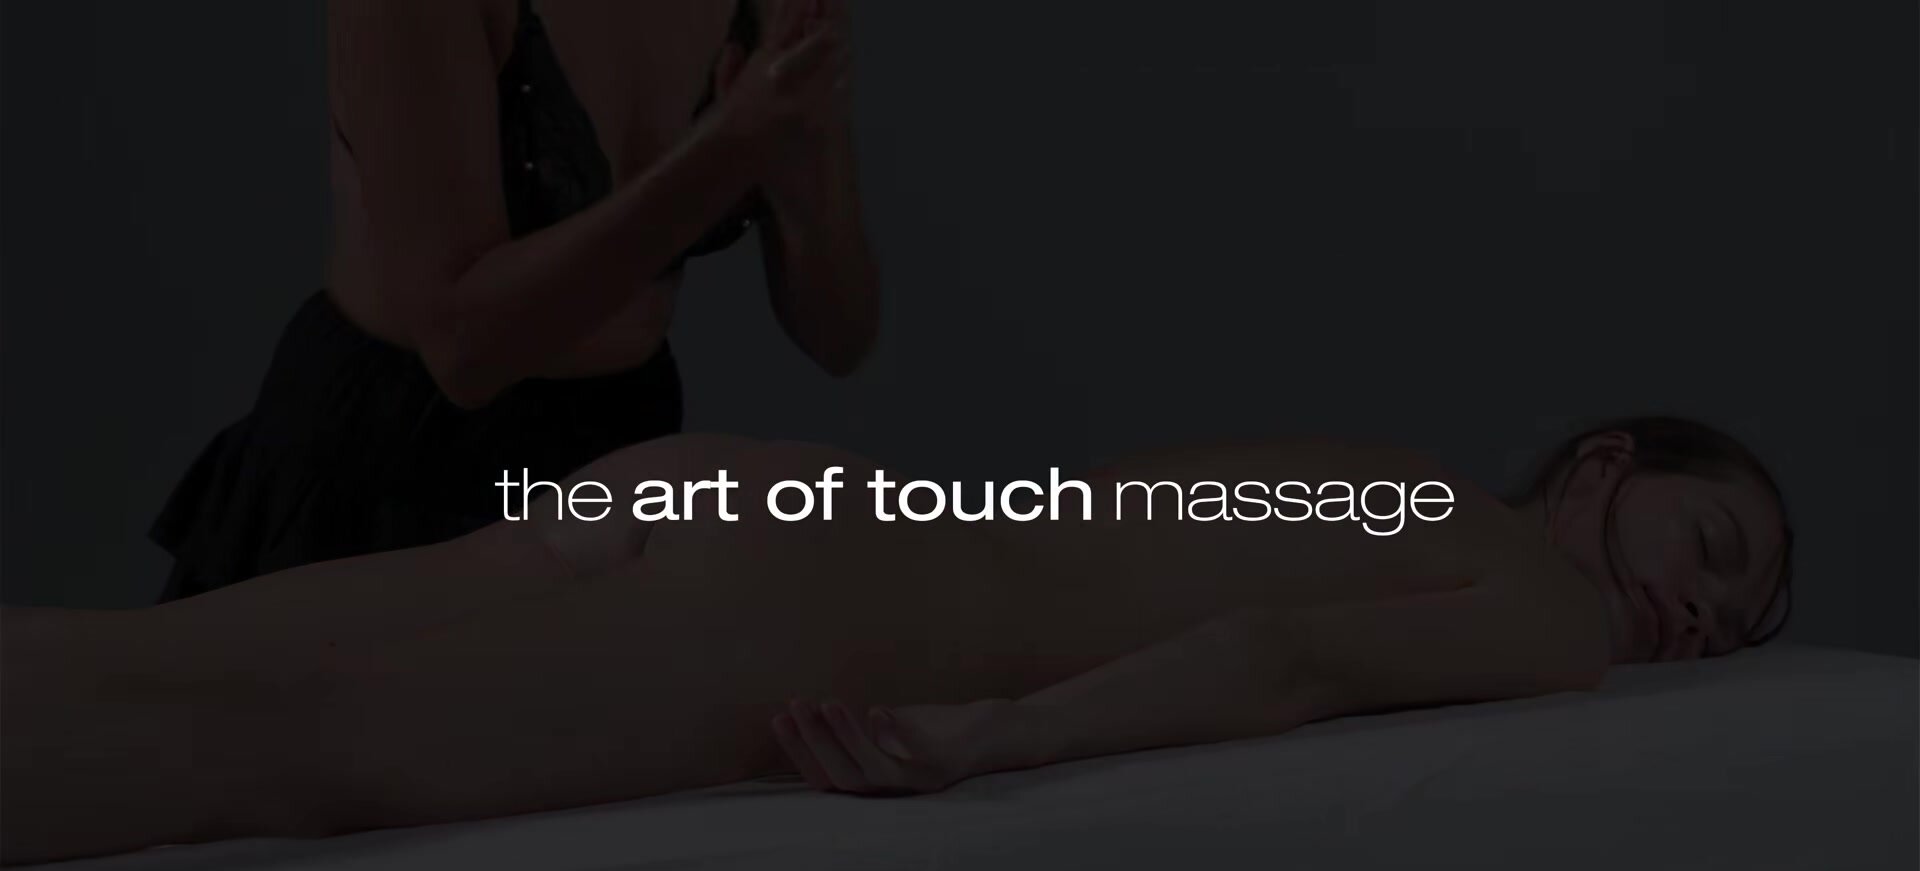 Hegre - Any Moloko The Art Of Touch Massage